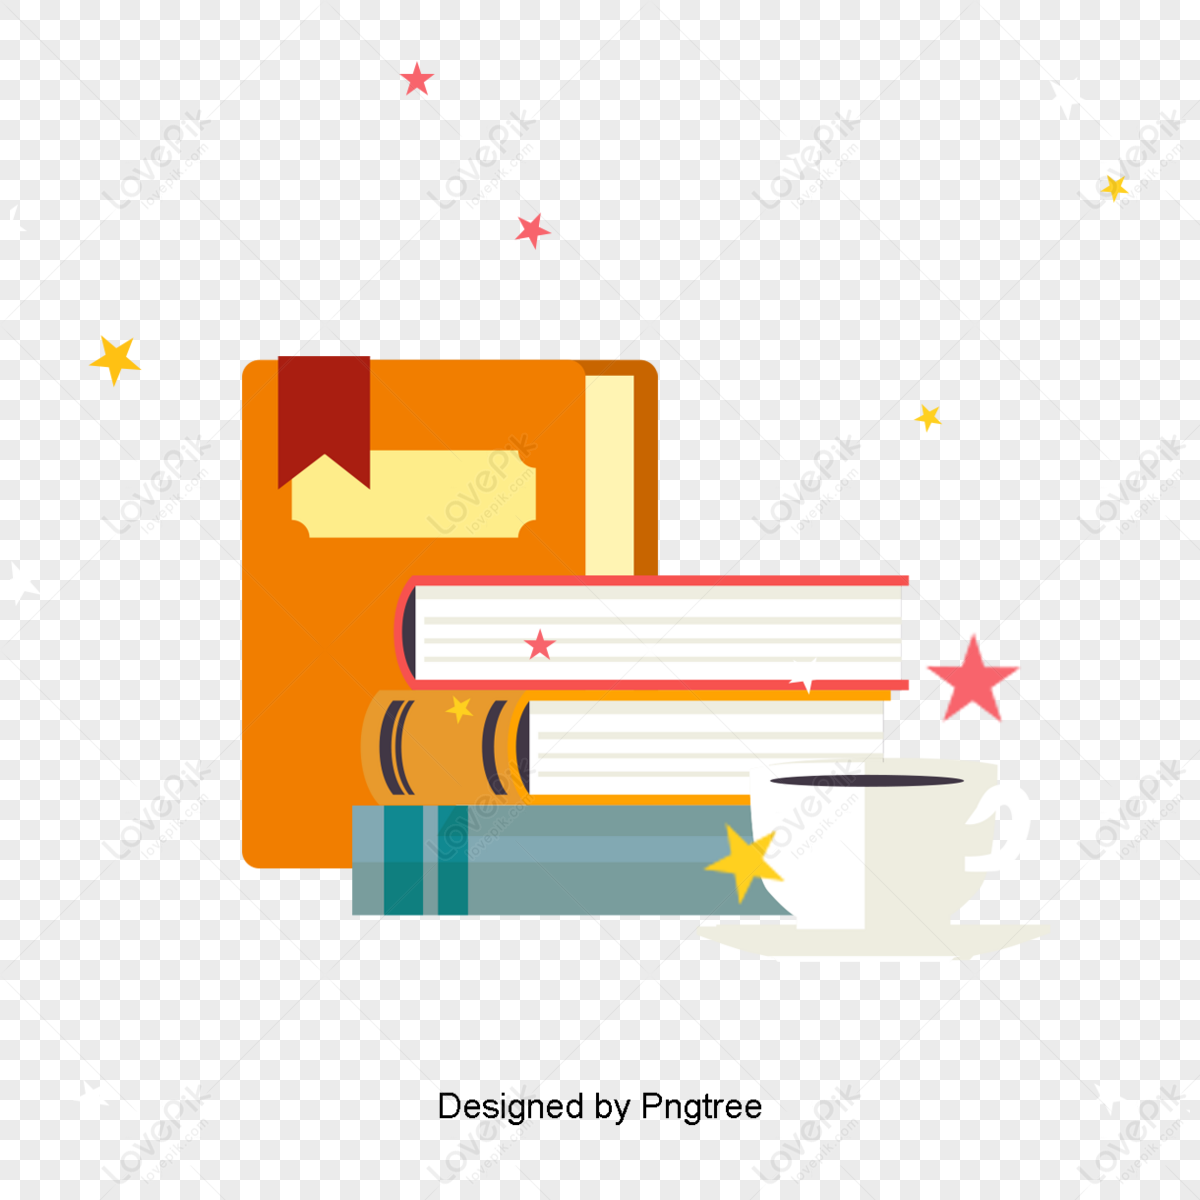 Colorful book design materials,learning,knowledge,graphic png image